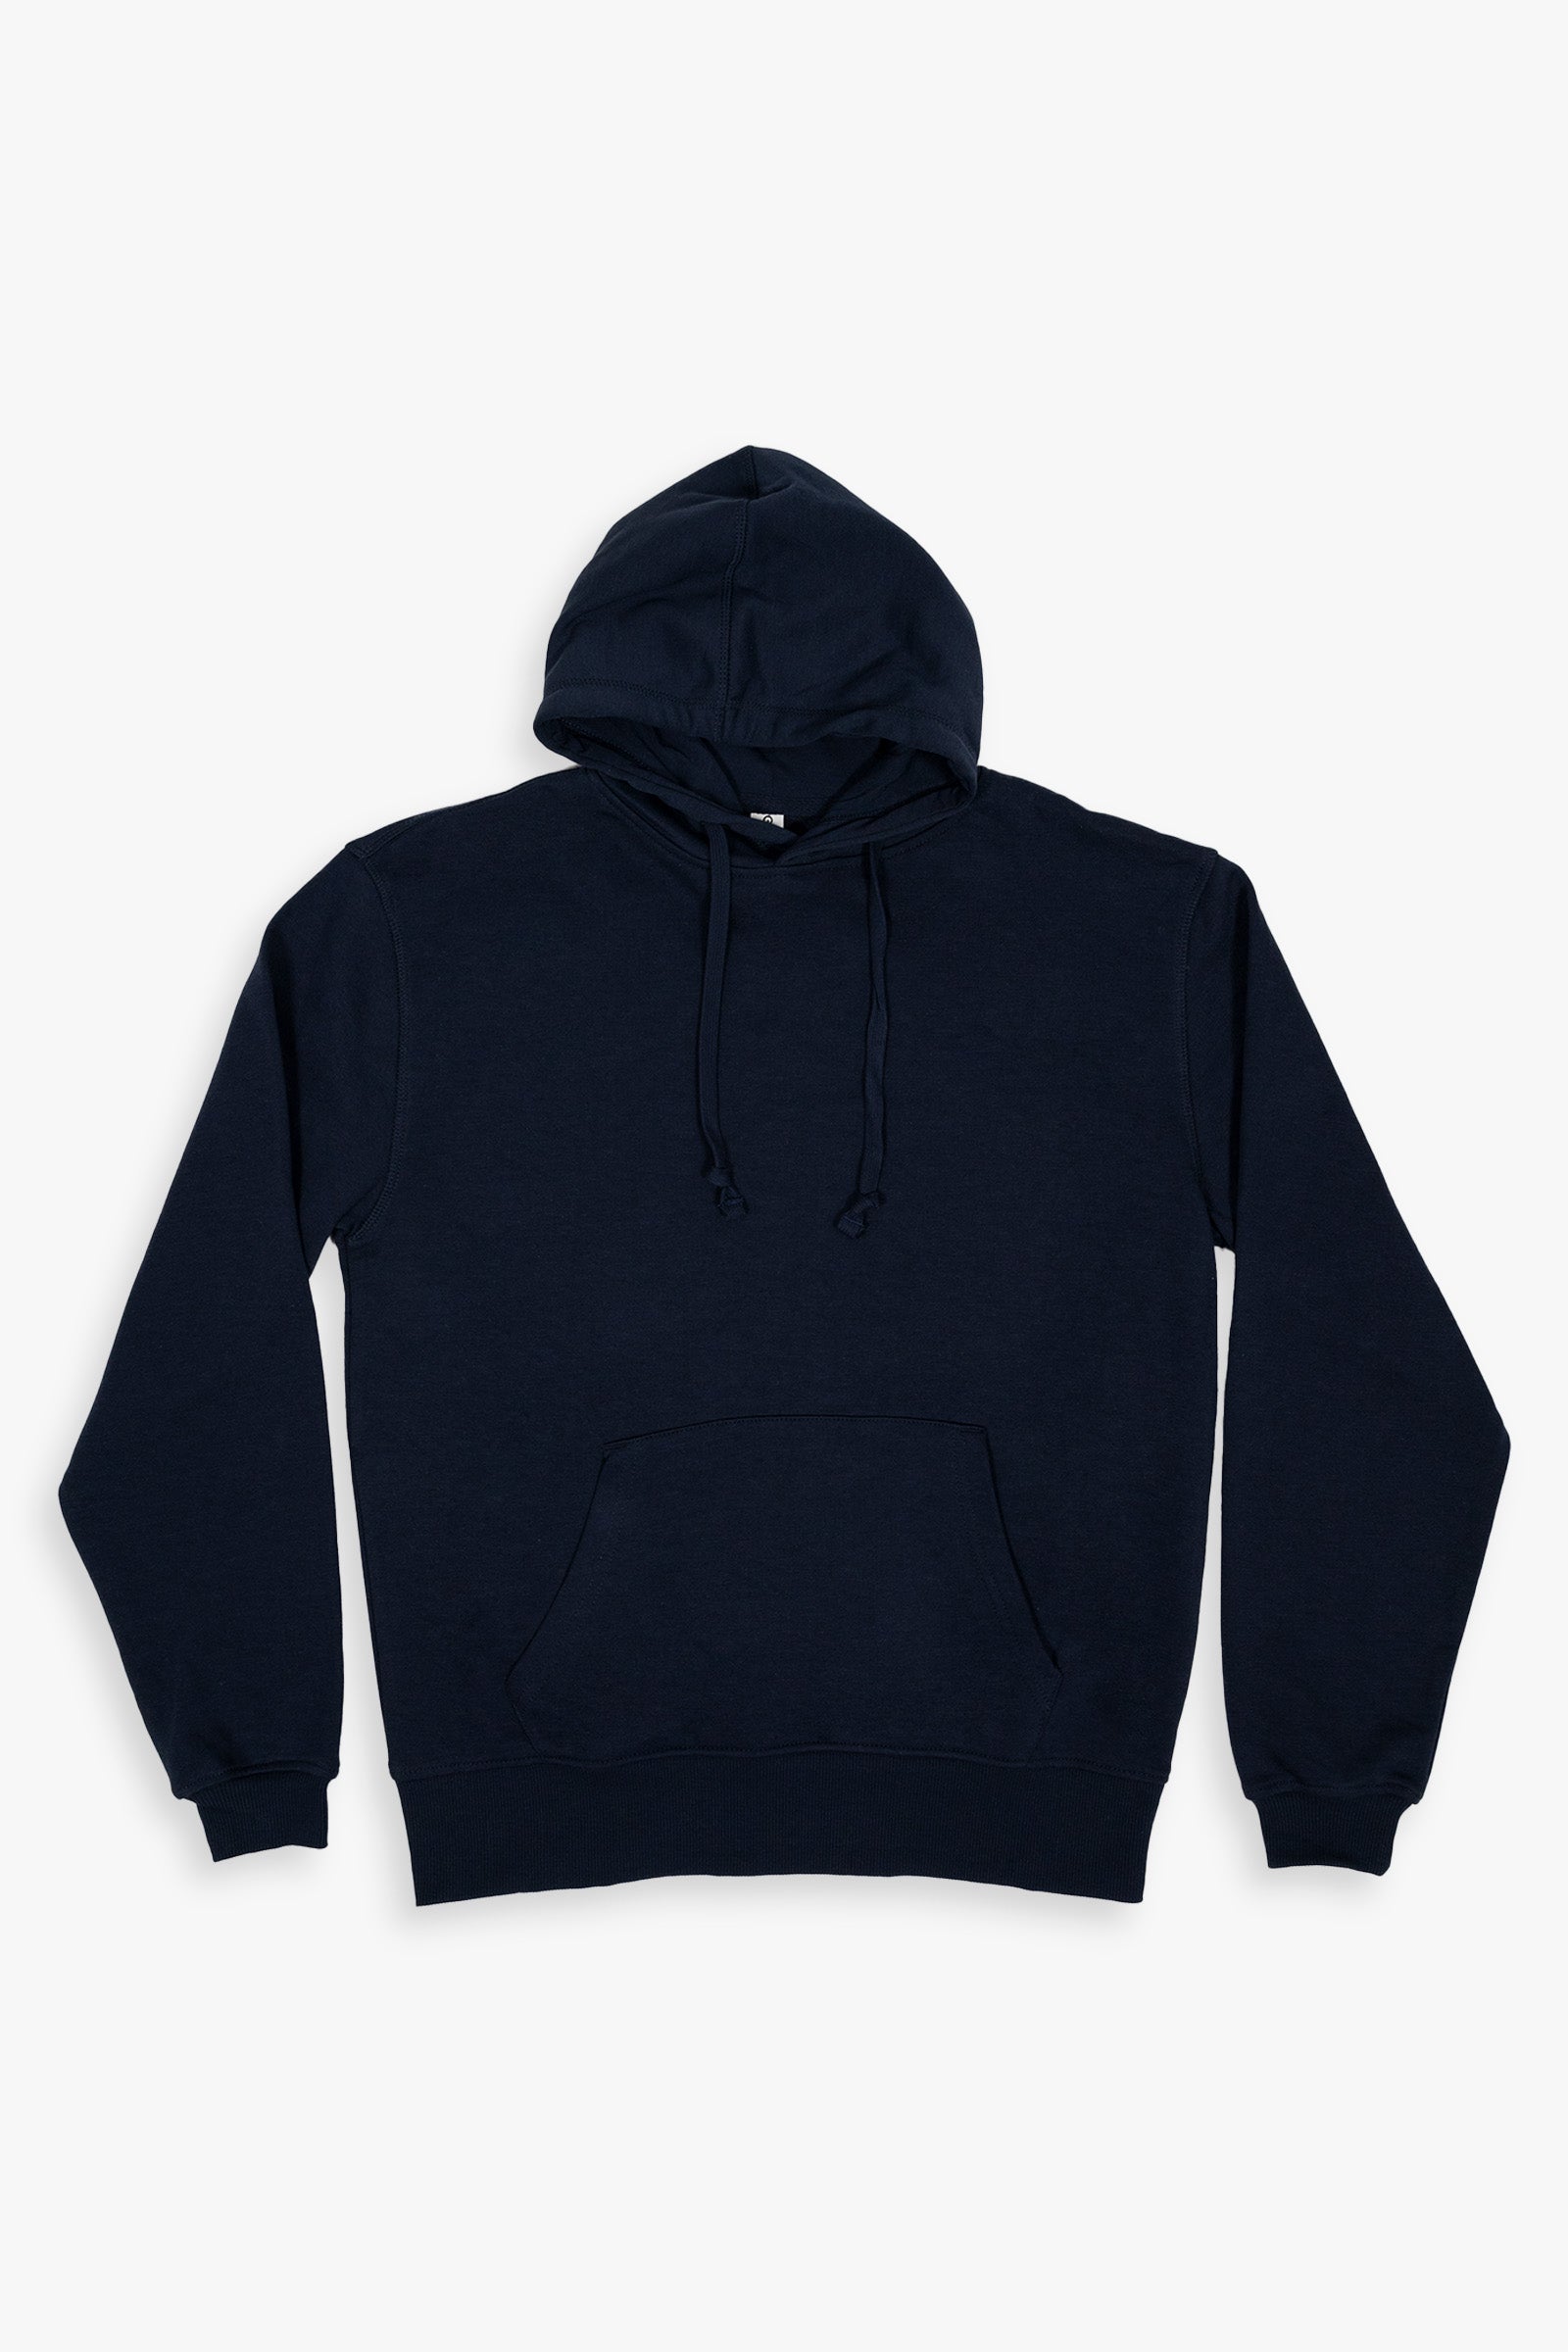 Adult Unisex French Terry Hoodie